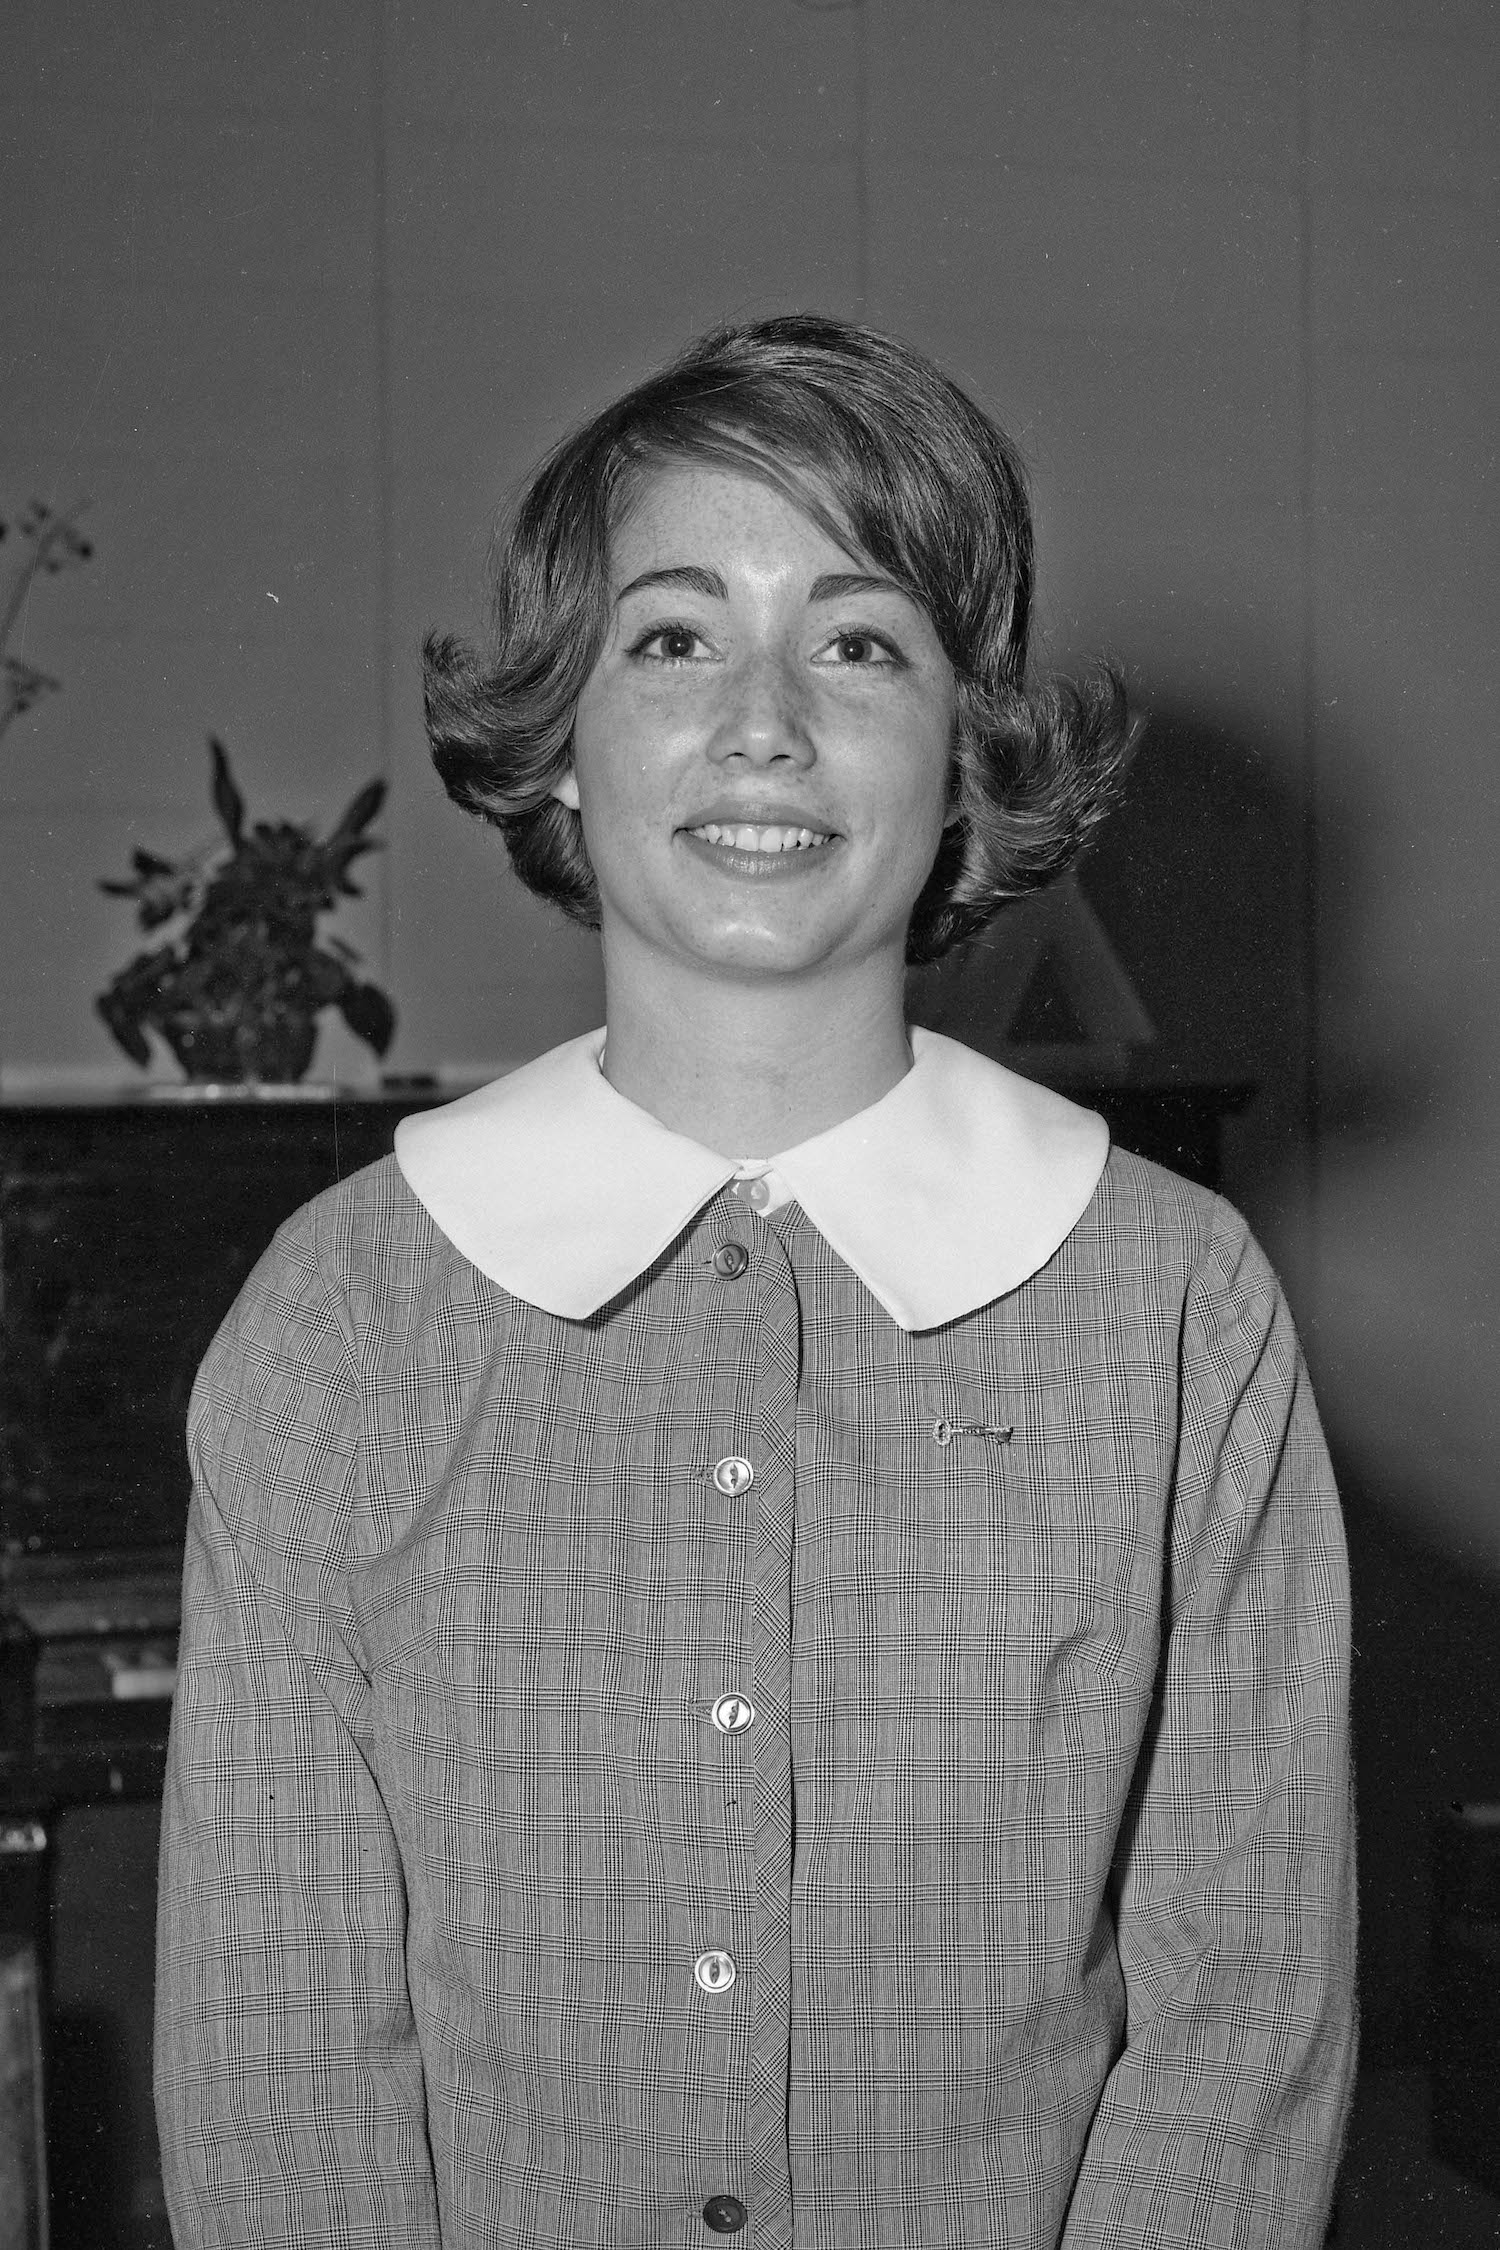 Mar 30, 1964, Mary, Spring mixer, Fresno State College